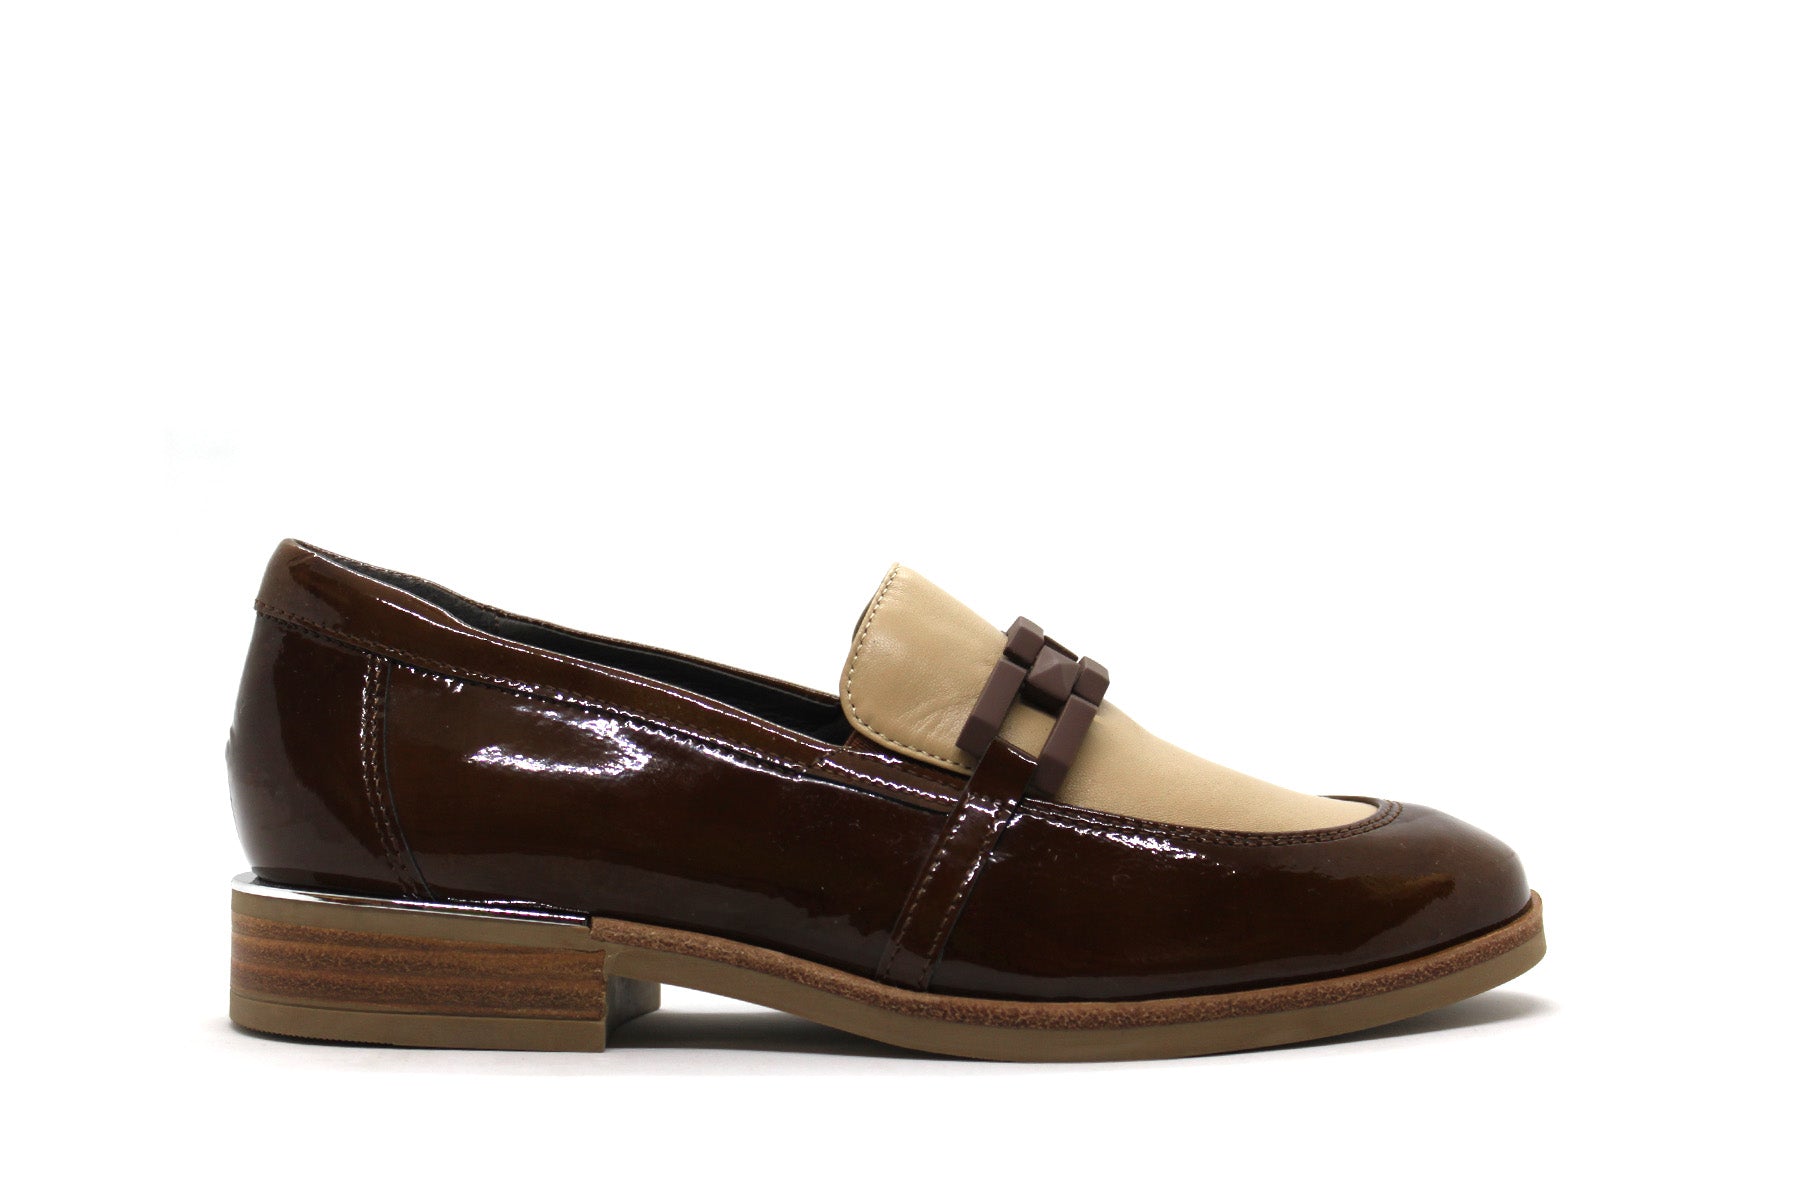 SoftWaves Gaby Cognac/Sahara Patent Leather Loafer